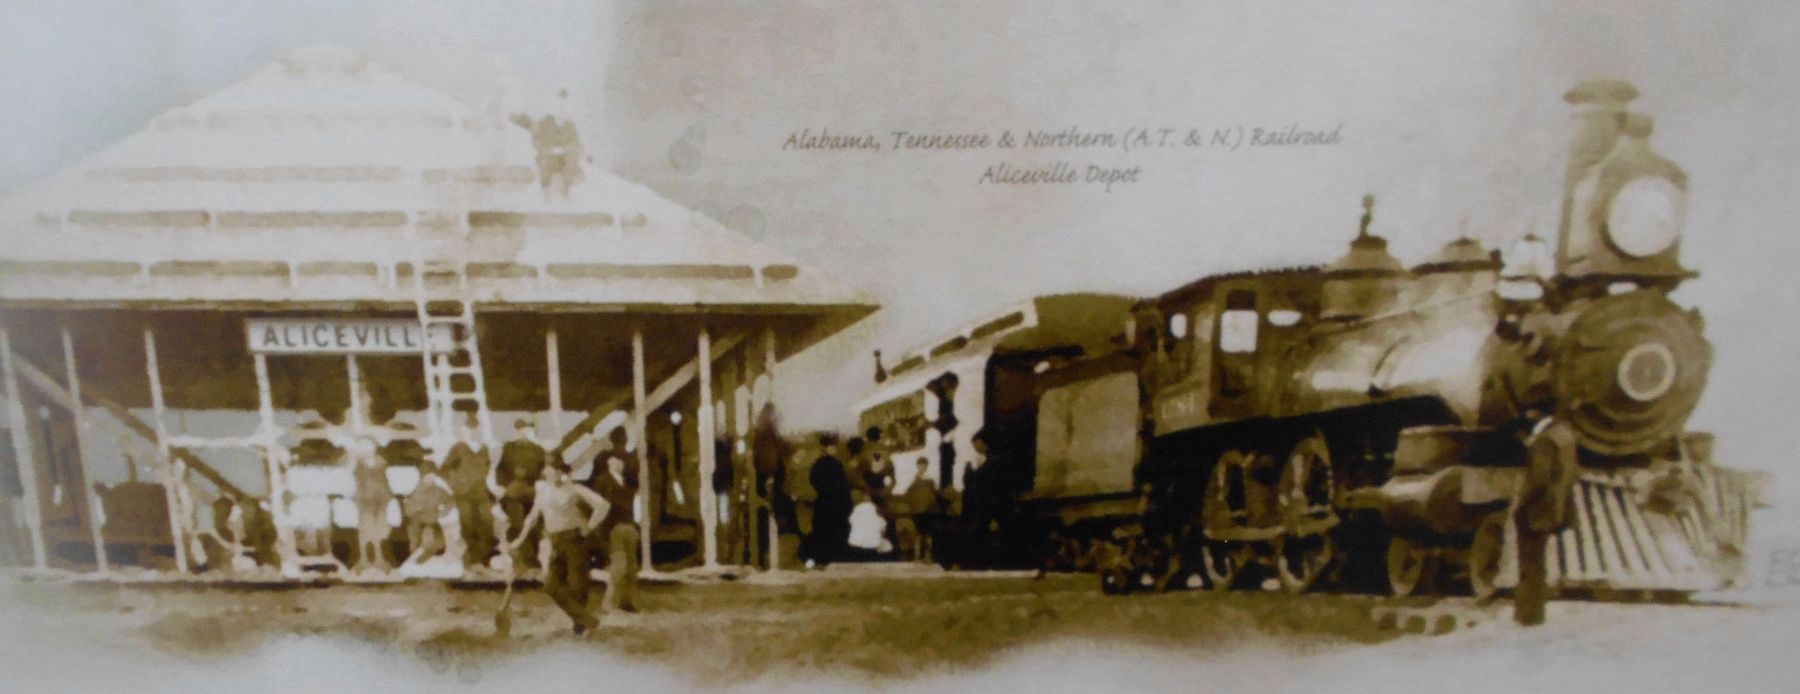 AT&N (Alabama, Tennessee and Northern) railroad depot at Aliceville under construction. image. Click for full size.